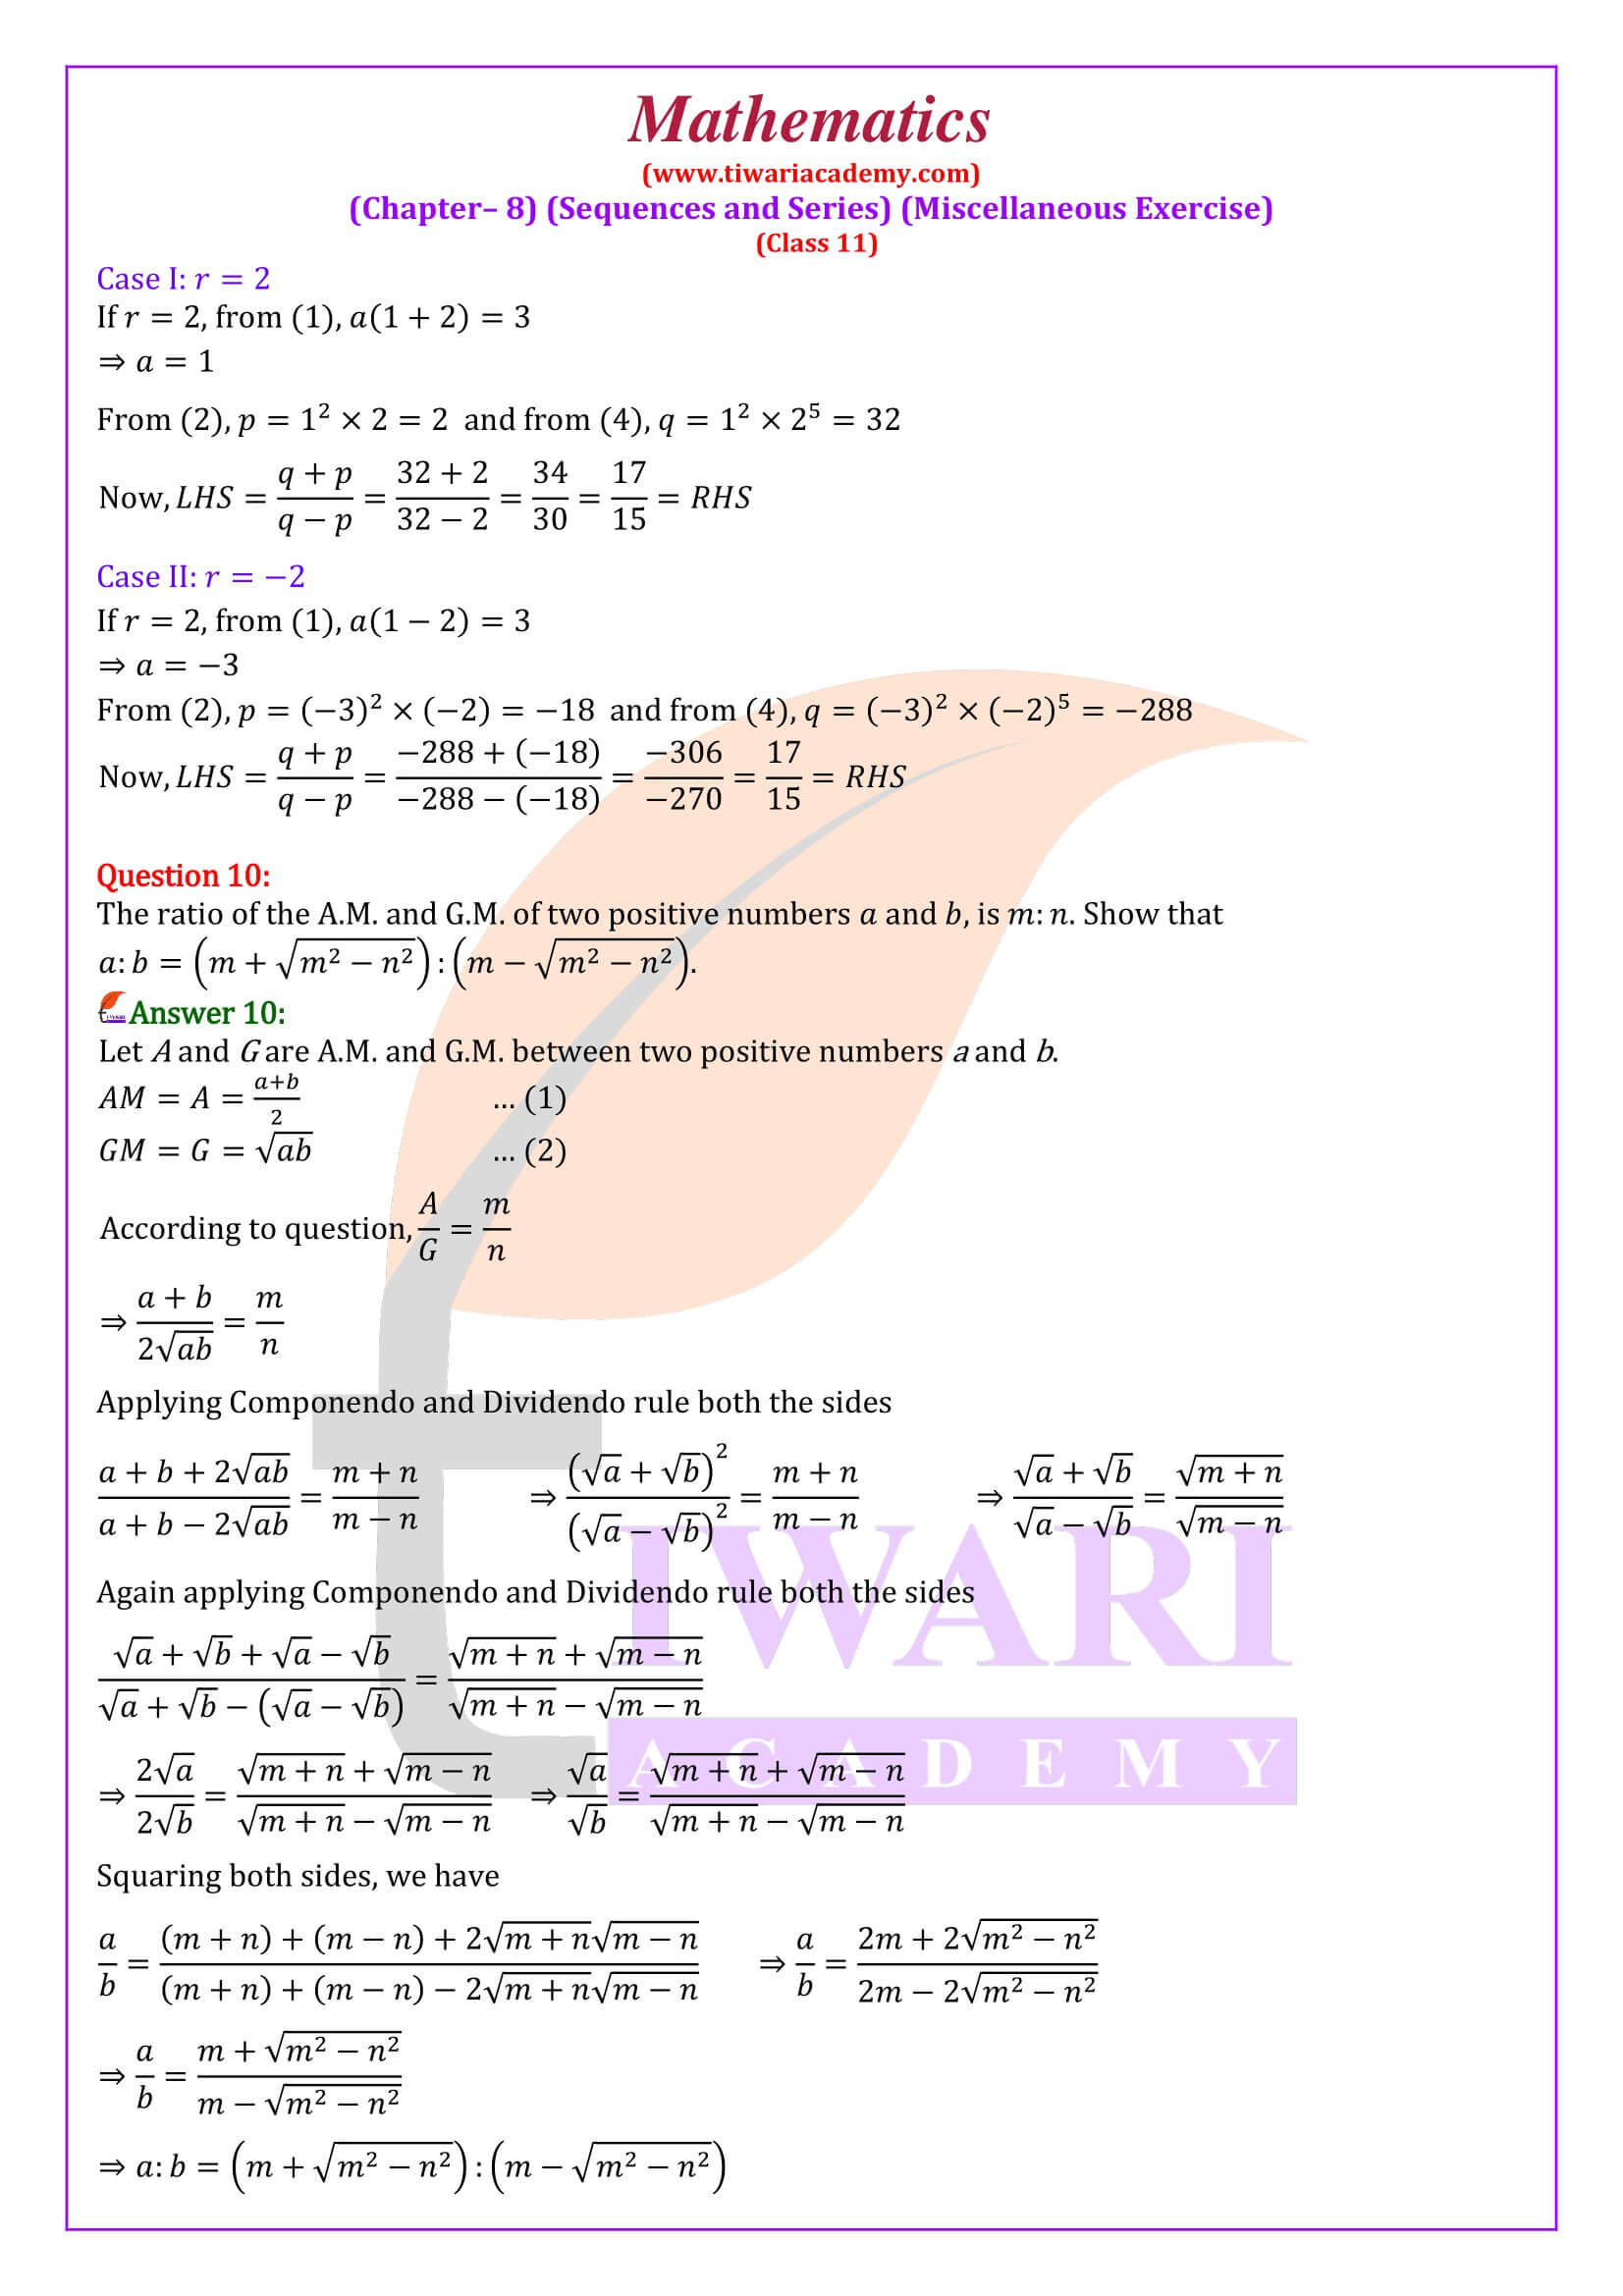 Class 11 Maths Chapter 8 Miscellaneous Exercise question answers